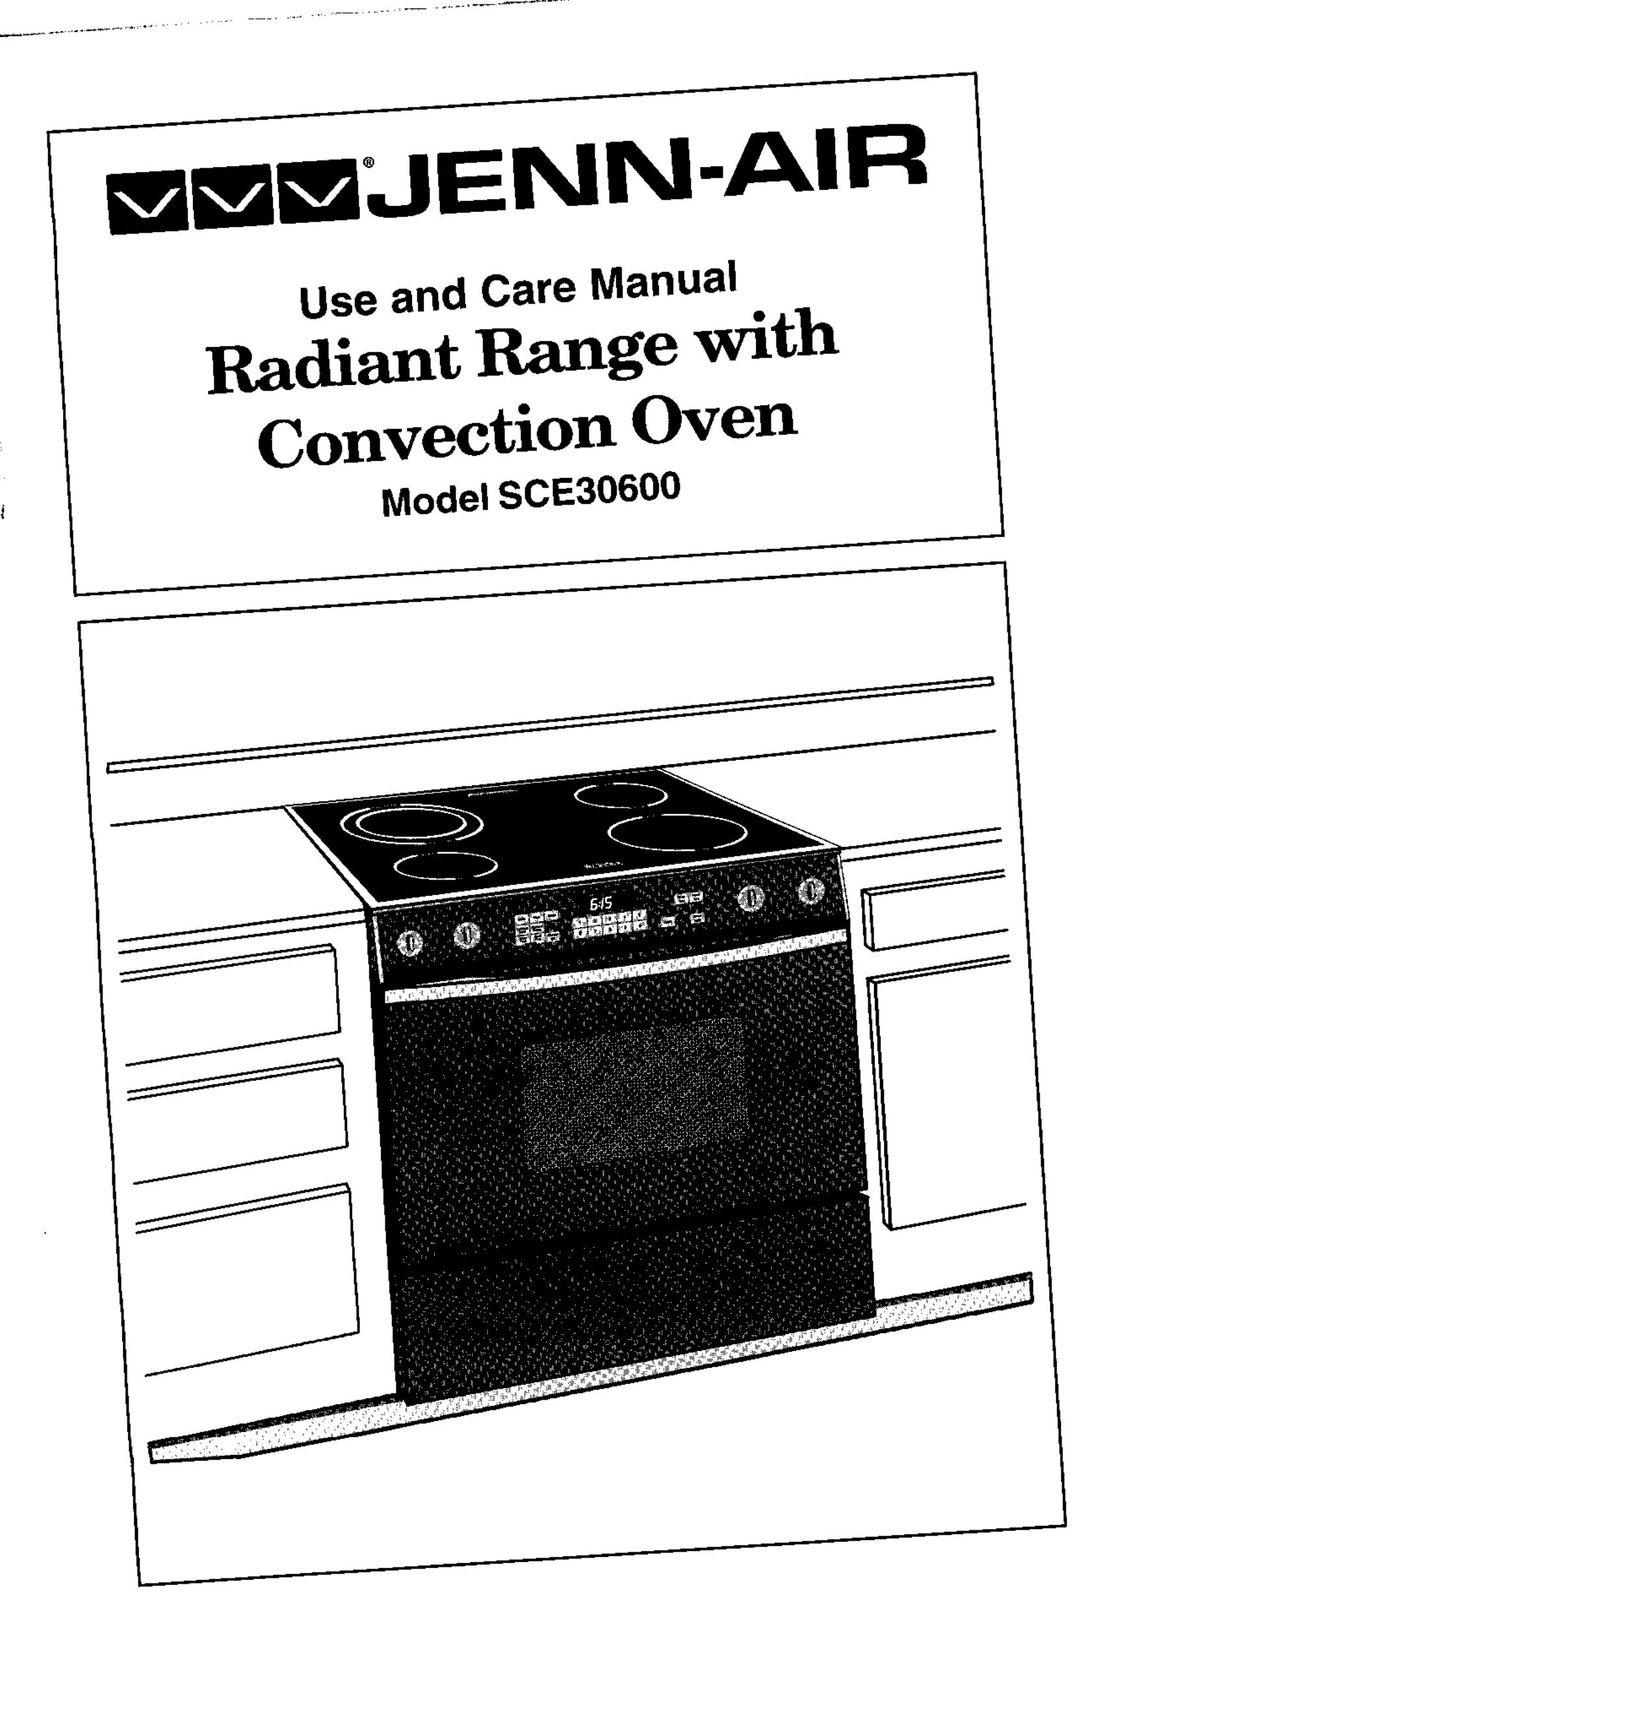 Jenn-Air SCE30600 Convection Oven User Manual